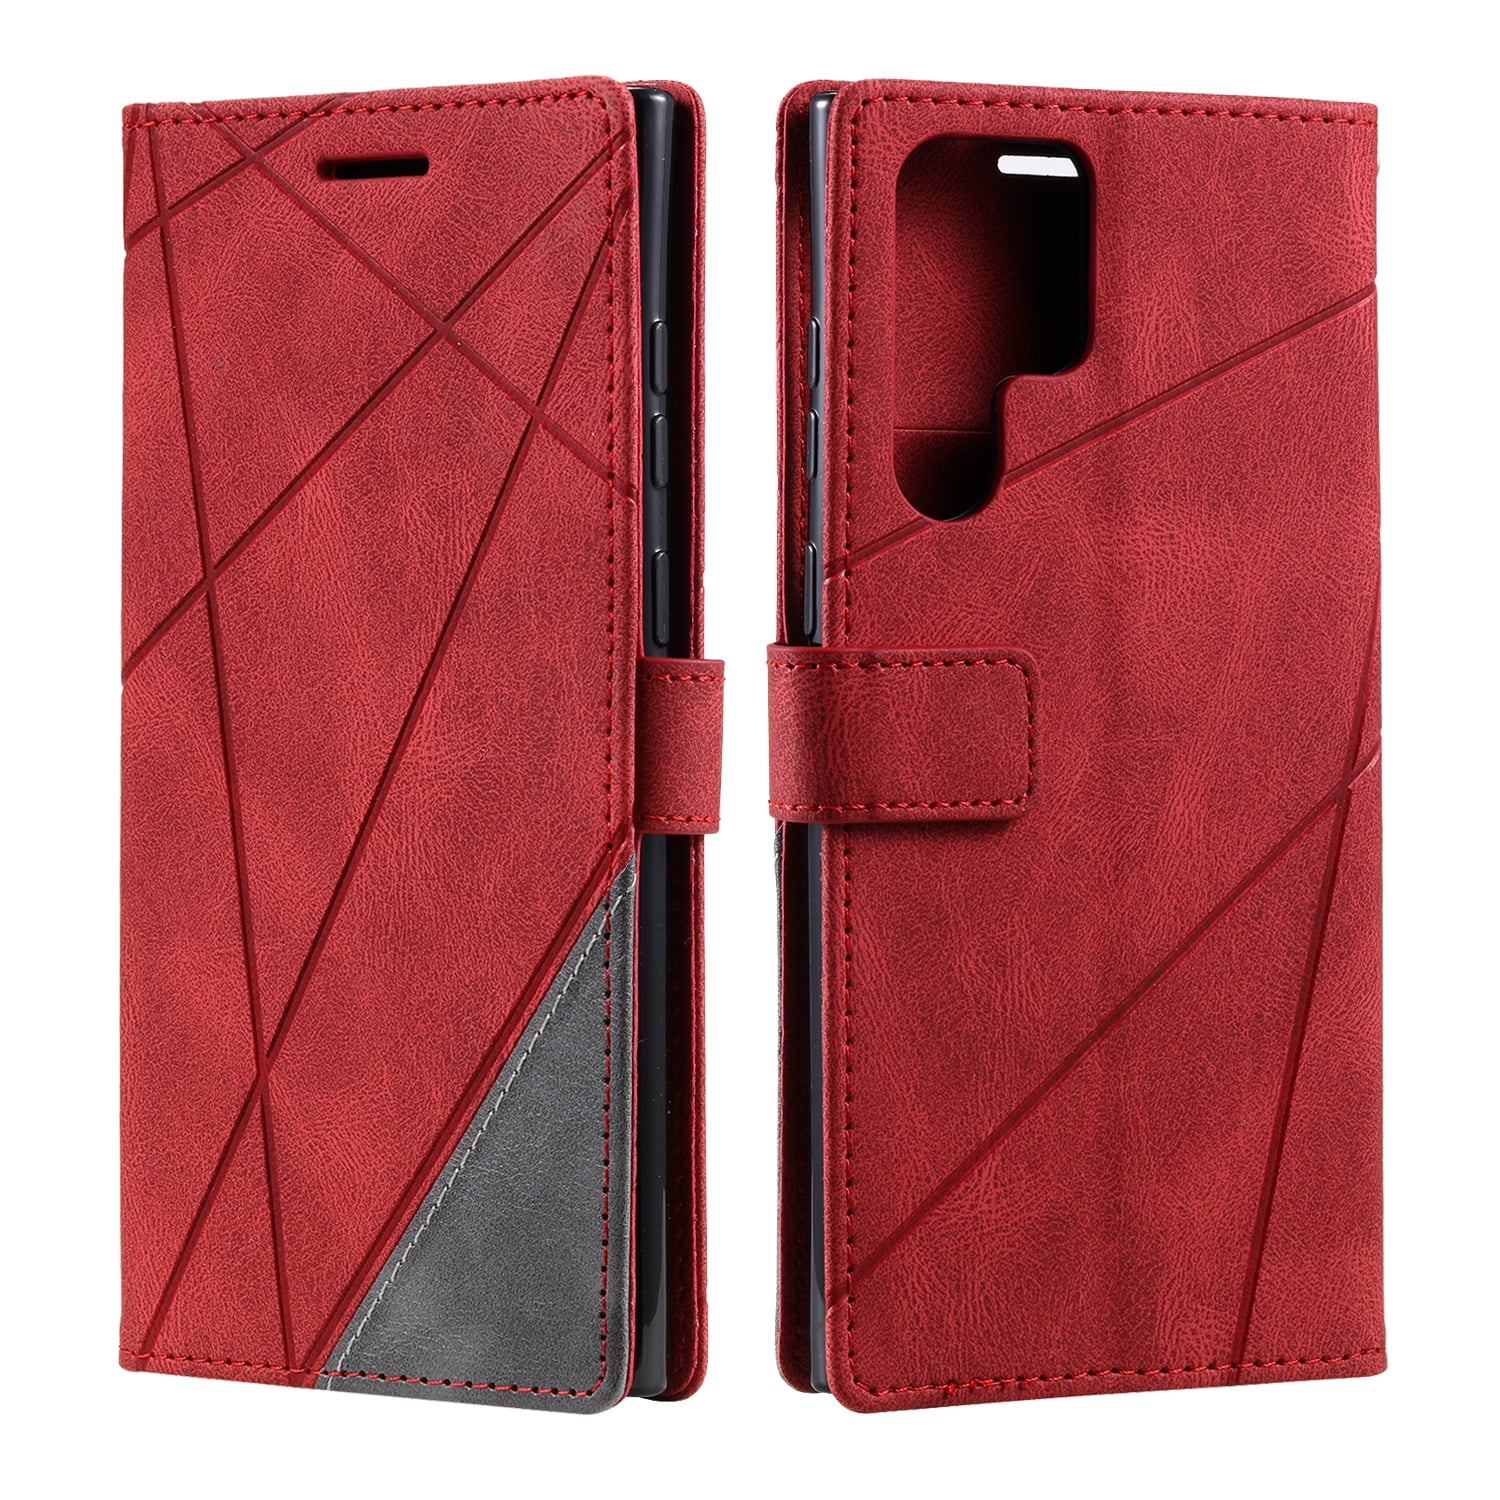 Samsung Galaxy A60 Flip Case Cover for Samsung Galaxy A60 Leather Premium Business Card Holders Kickstand Wallet Cover Flip Cover 